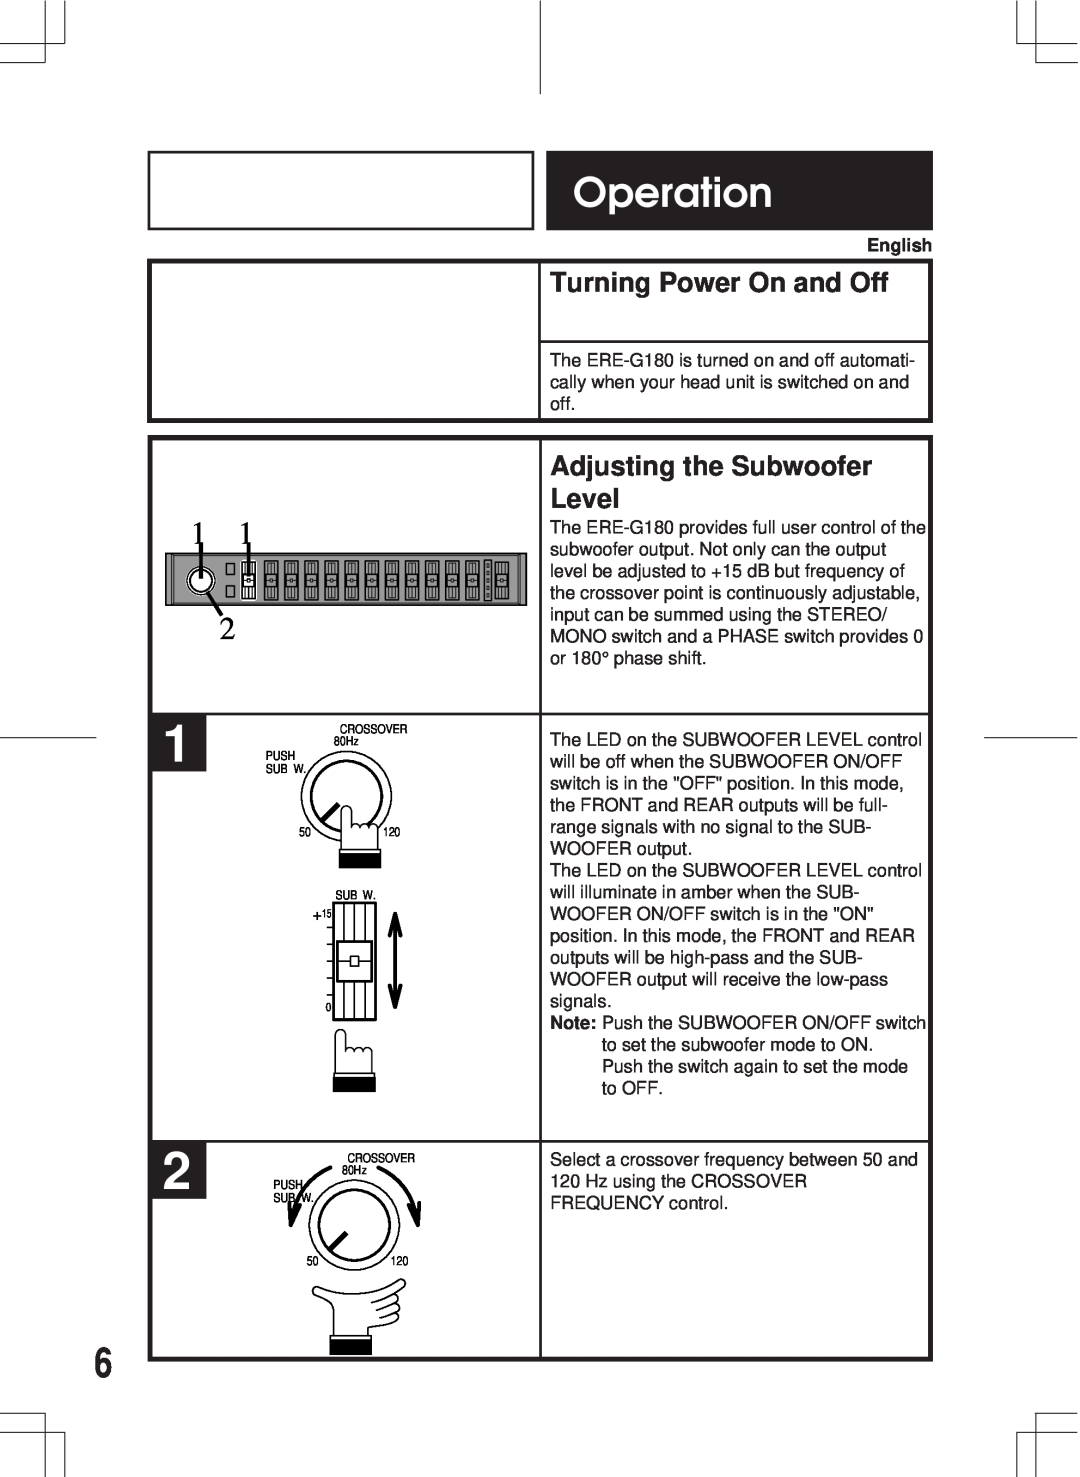 Alpine ERE-G180 owner manual Operation, Turning Power On and Off, Adjusting the Subwoofer, Level 